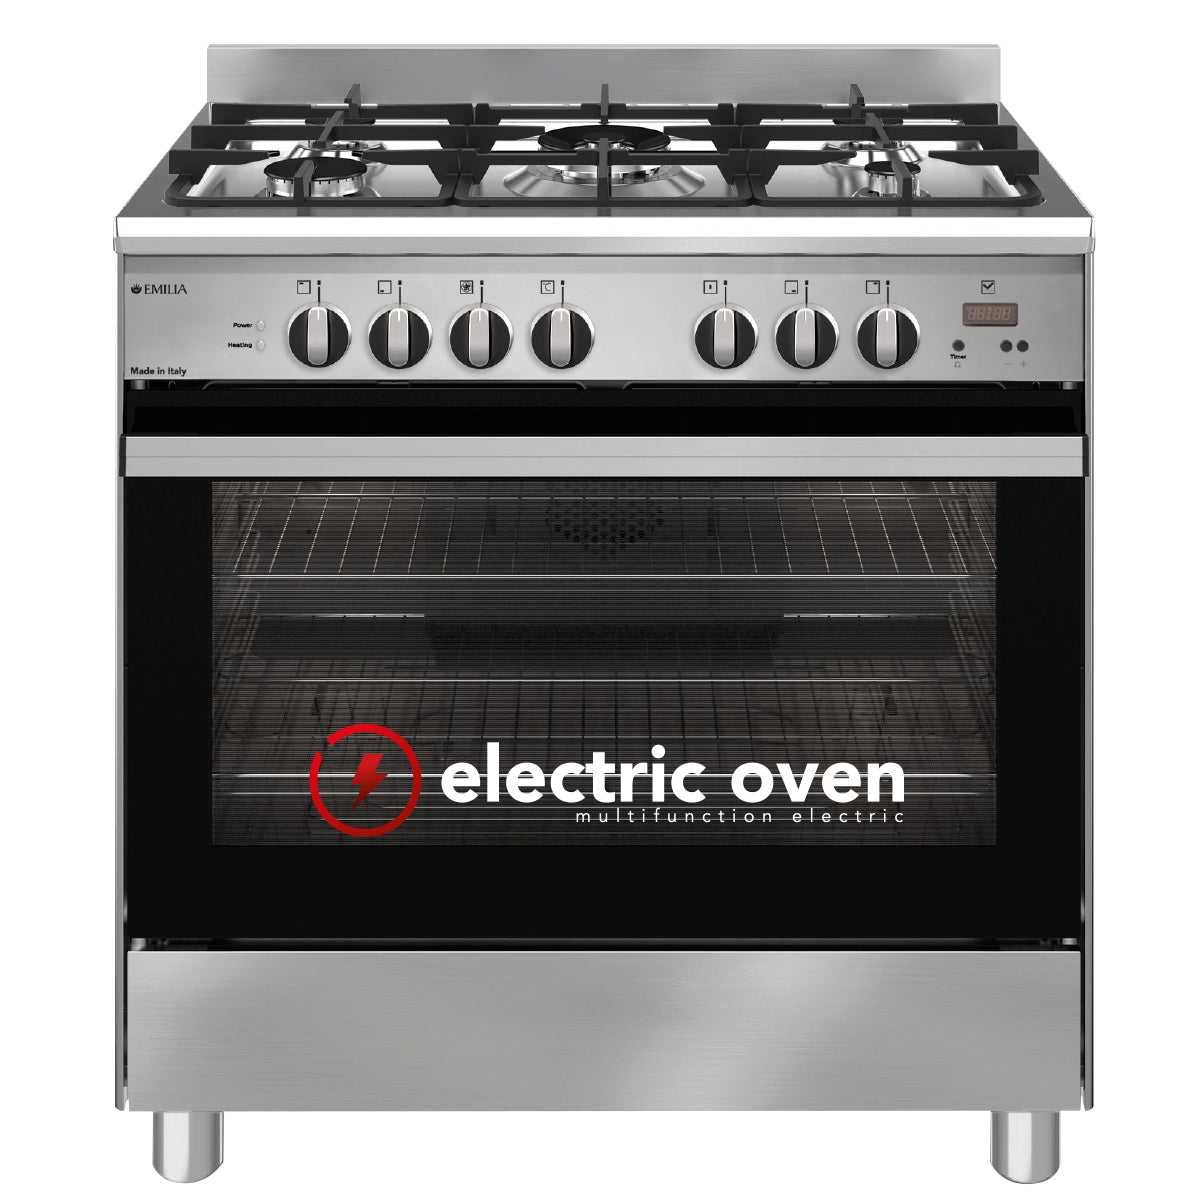 Emilia 80cm Dual Fuel cooker with Electric Oven